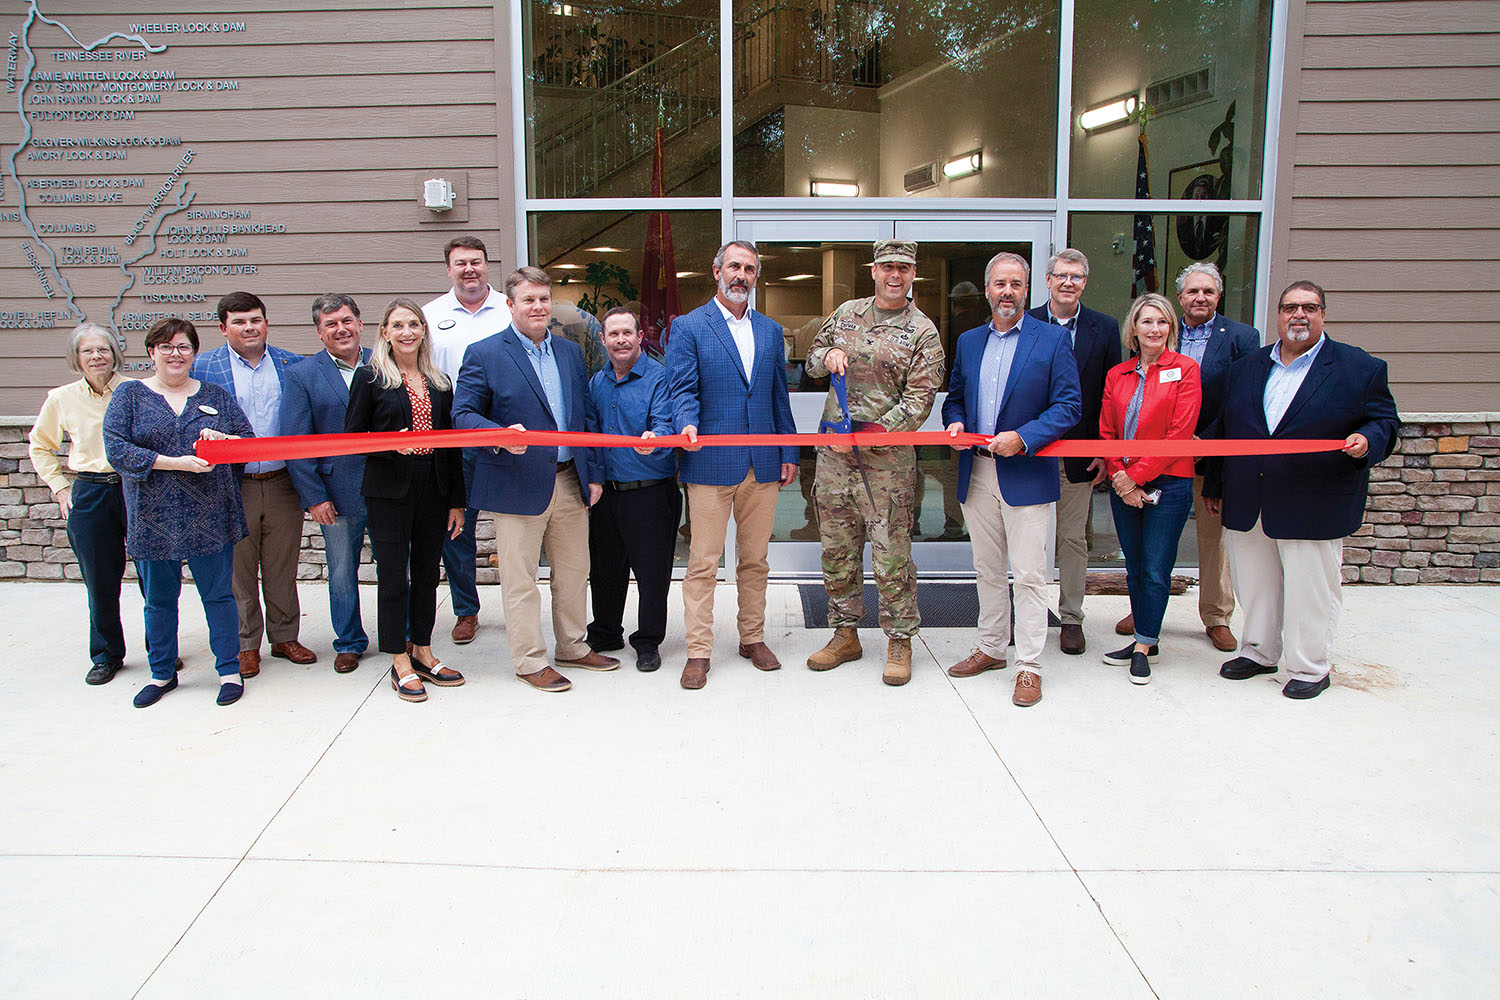 Tennessee-Tombigbee Waterway officials and stakeholders cut the ribbon for a new Waterway Management Center in Columbus, Miss. (Photo by Frank McCormack)